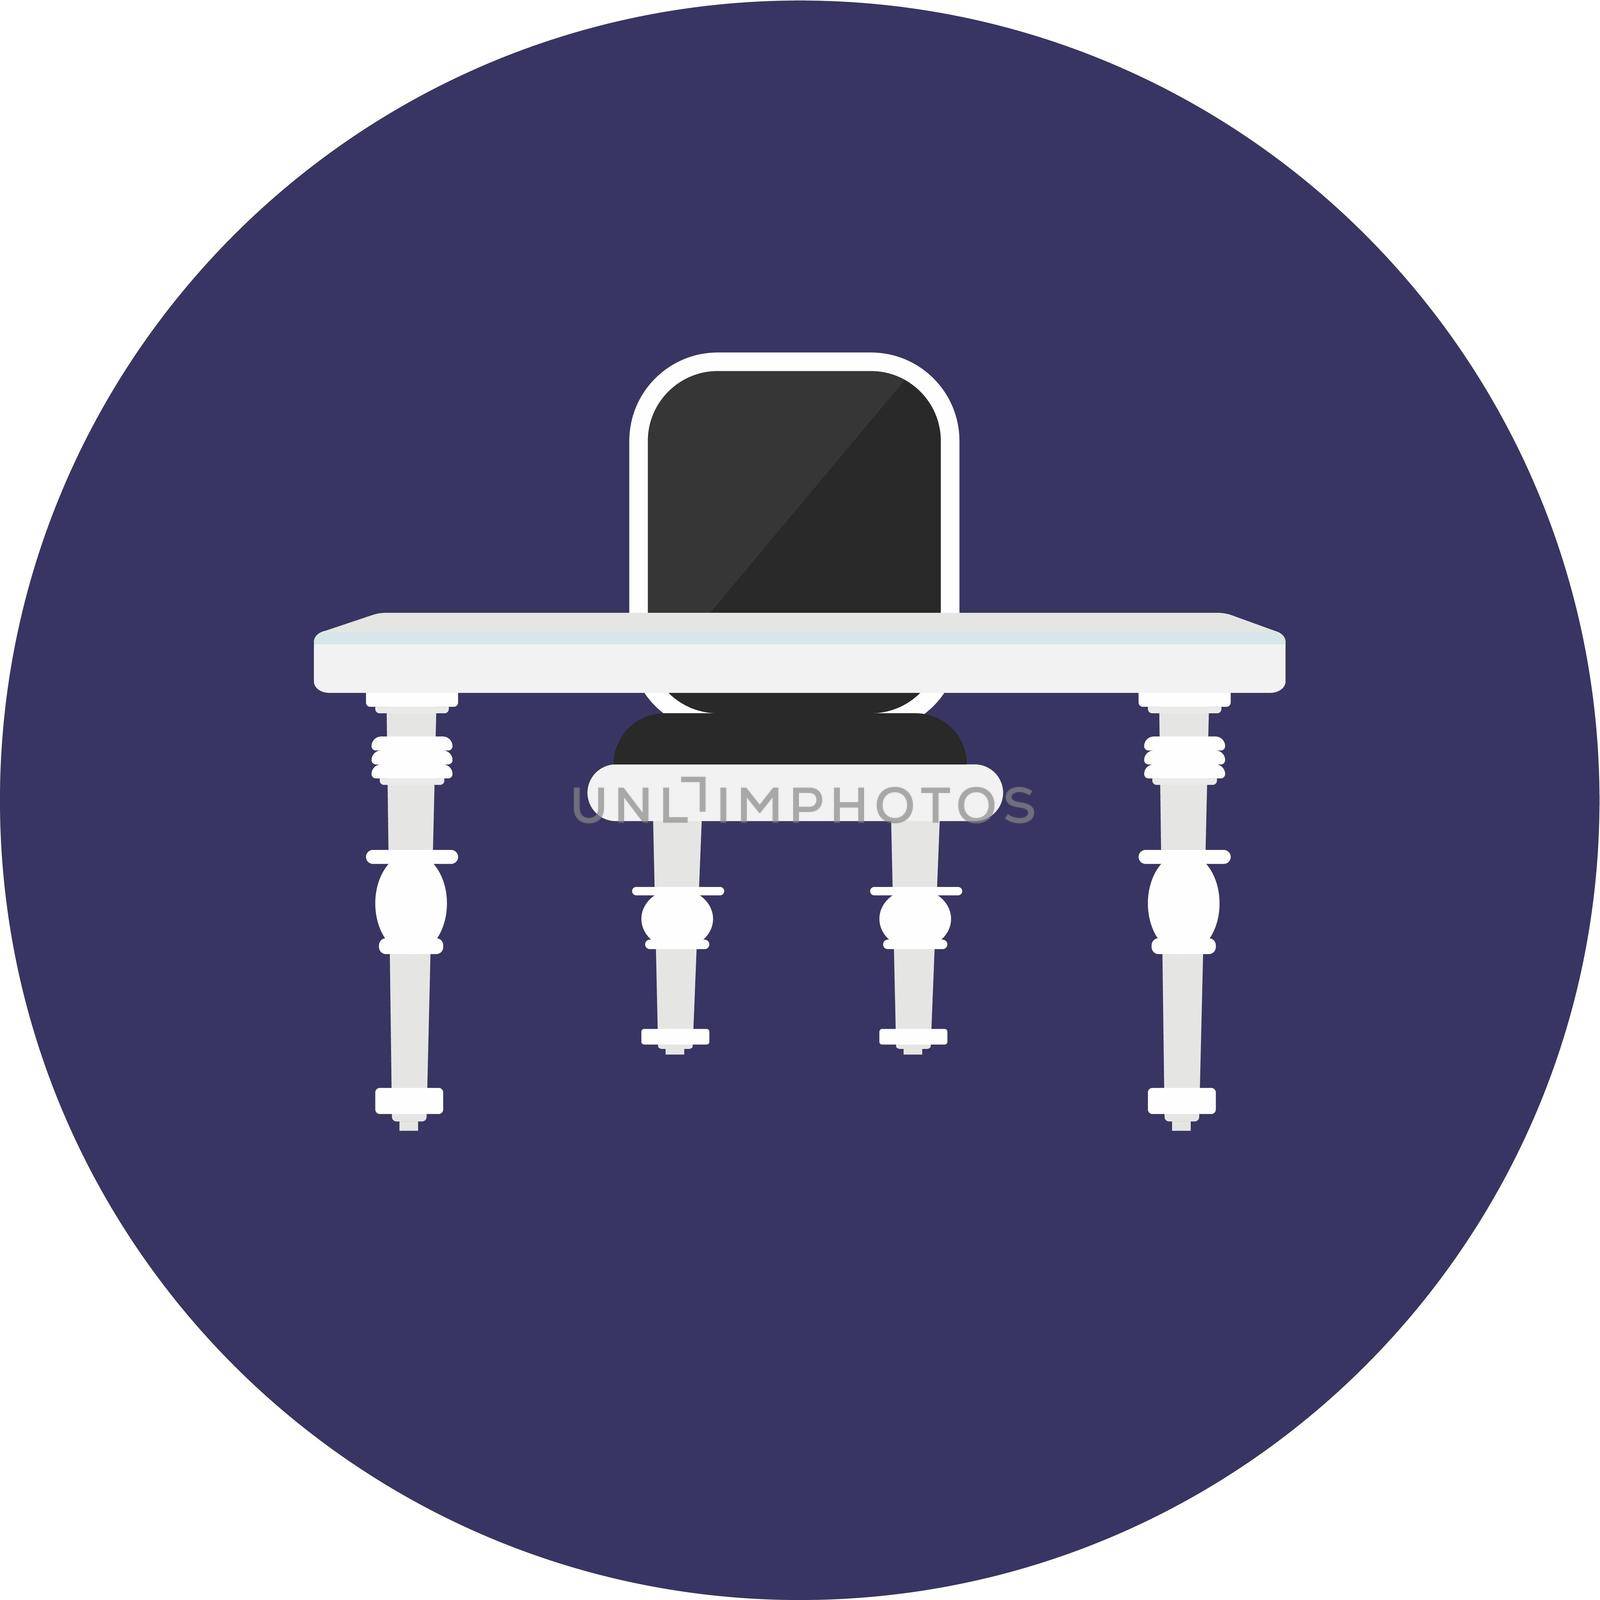 Table chair, illustration, vector on white background.